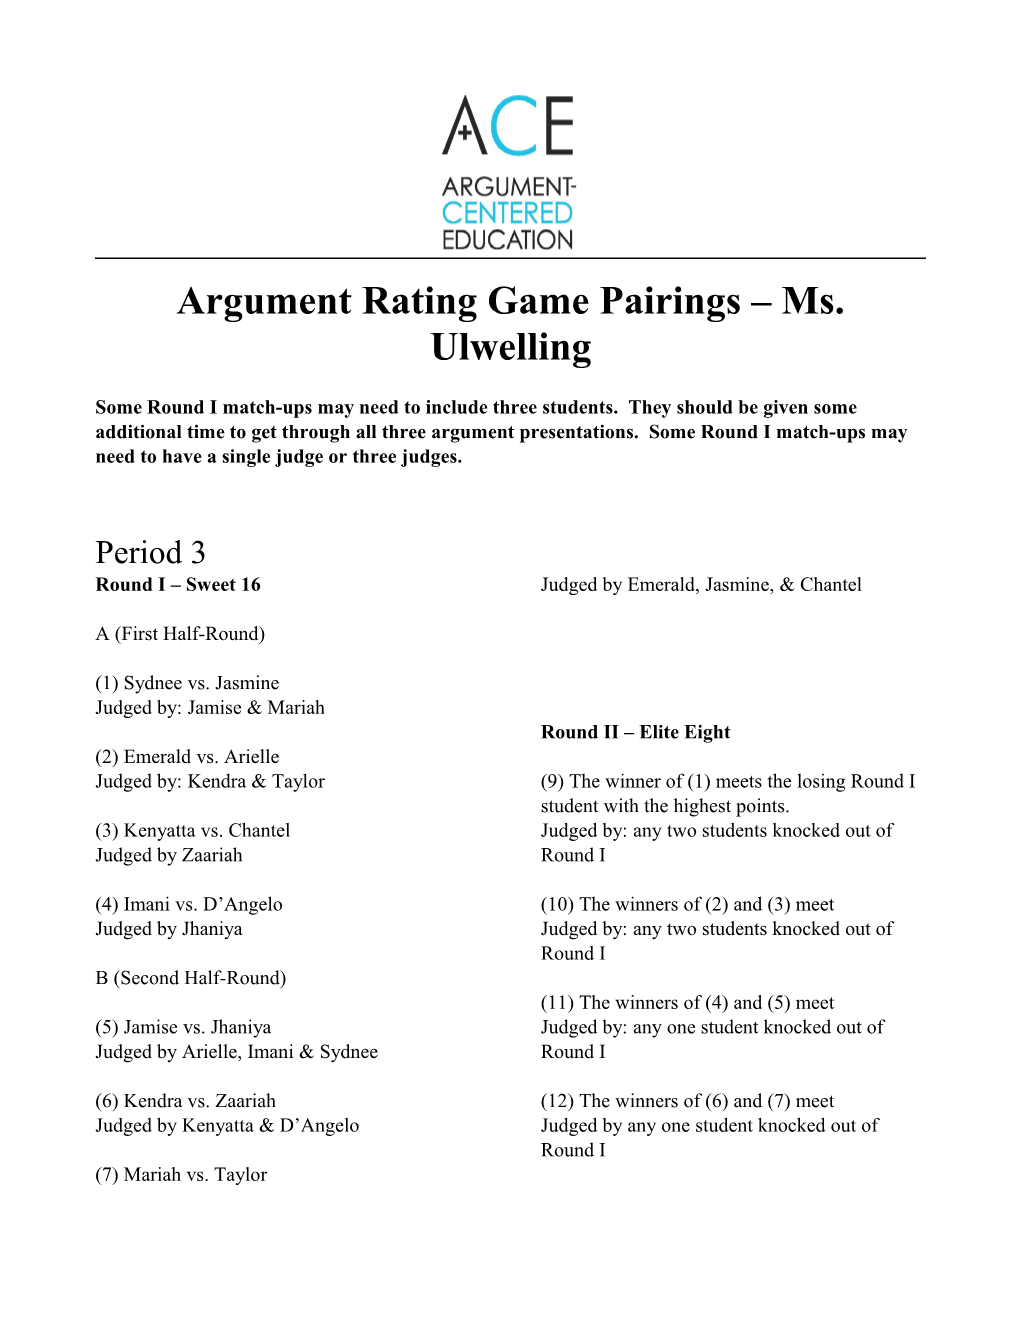 Argument Rating Game Pairings Ms. Ulwelling